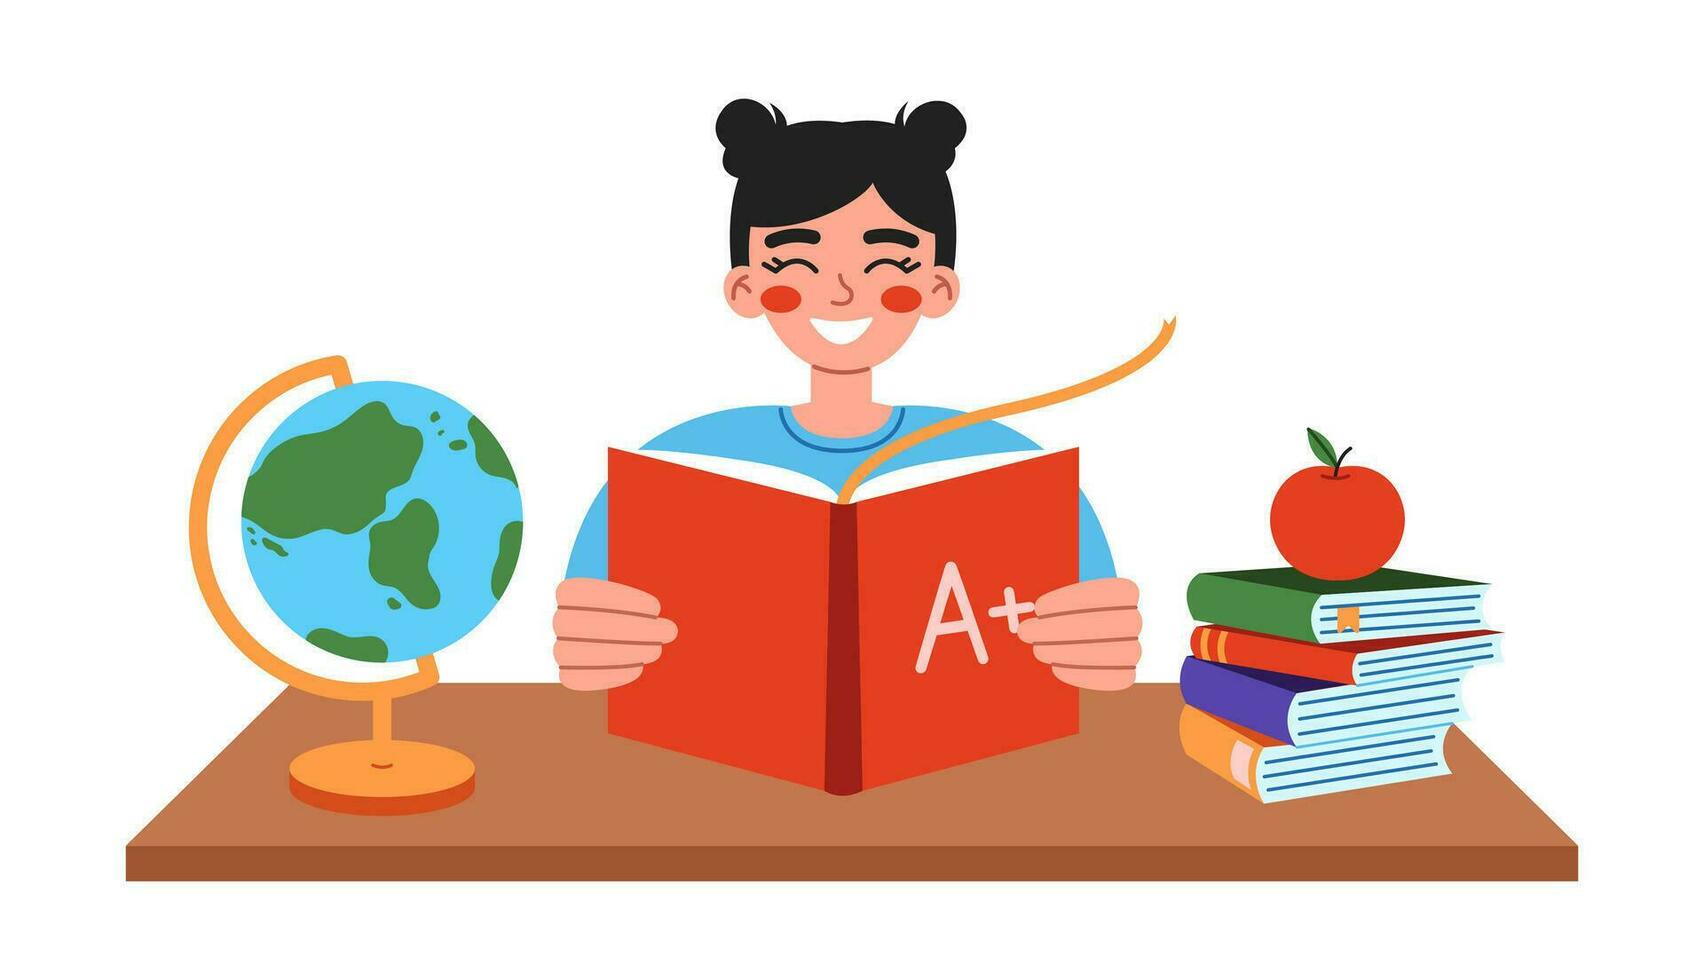 Cute school girl sitting at desk and reading on lesson. Flat vector illustration on white background.